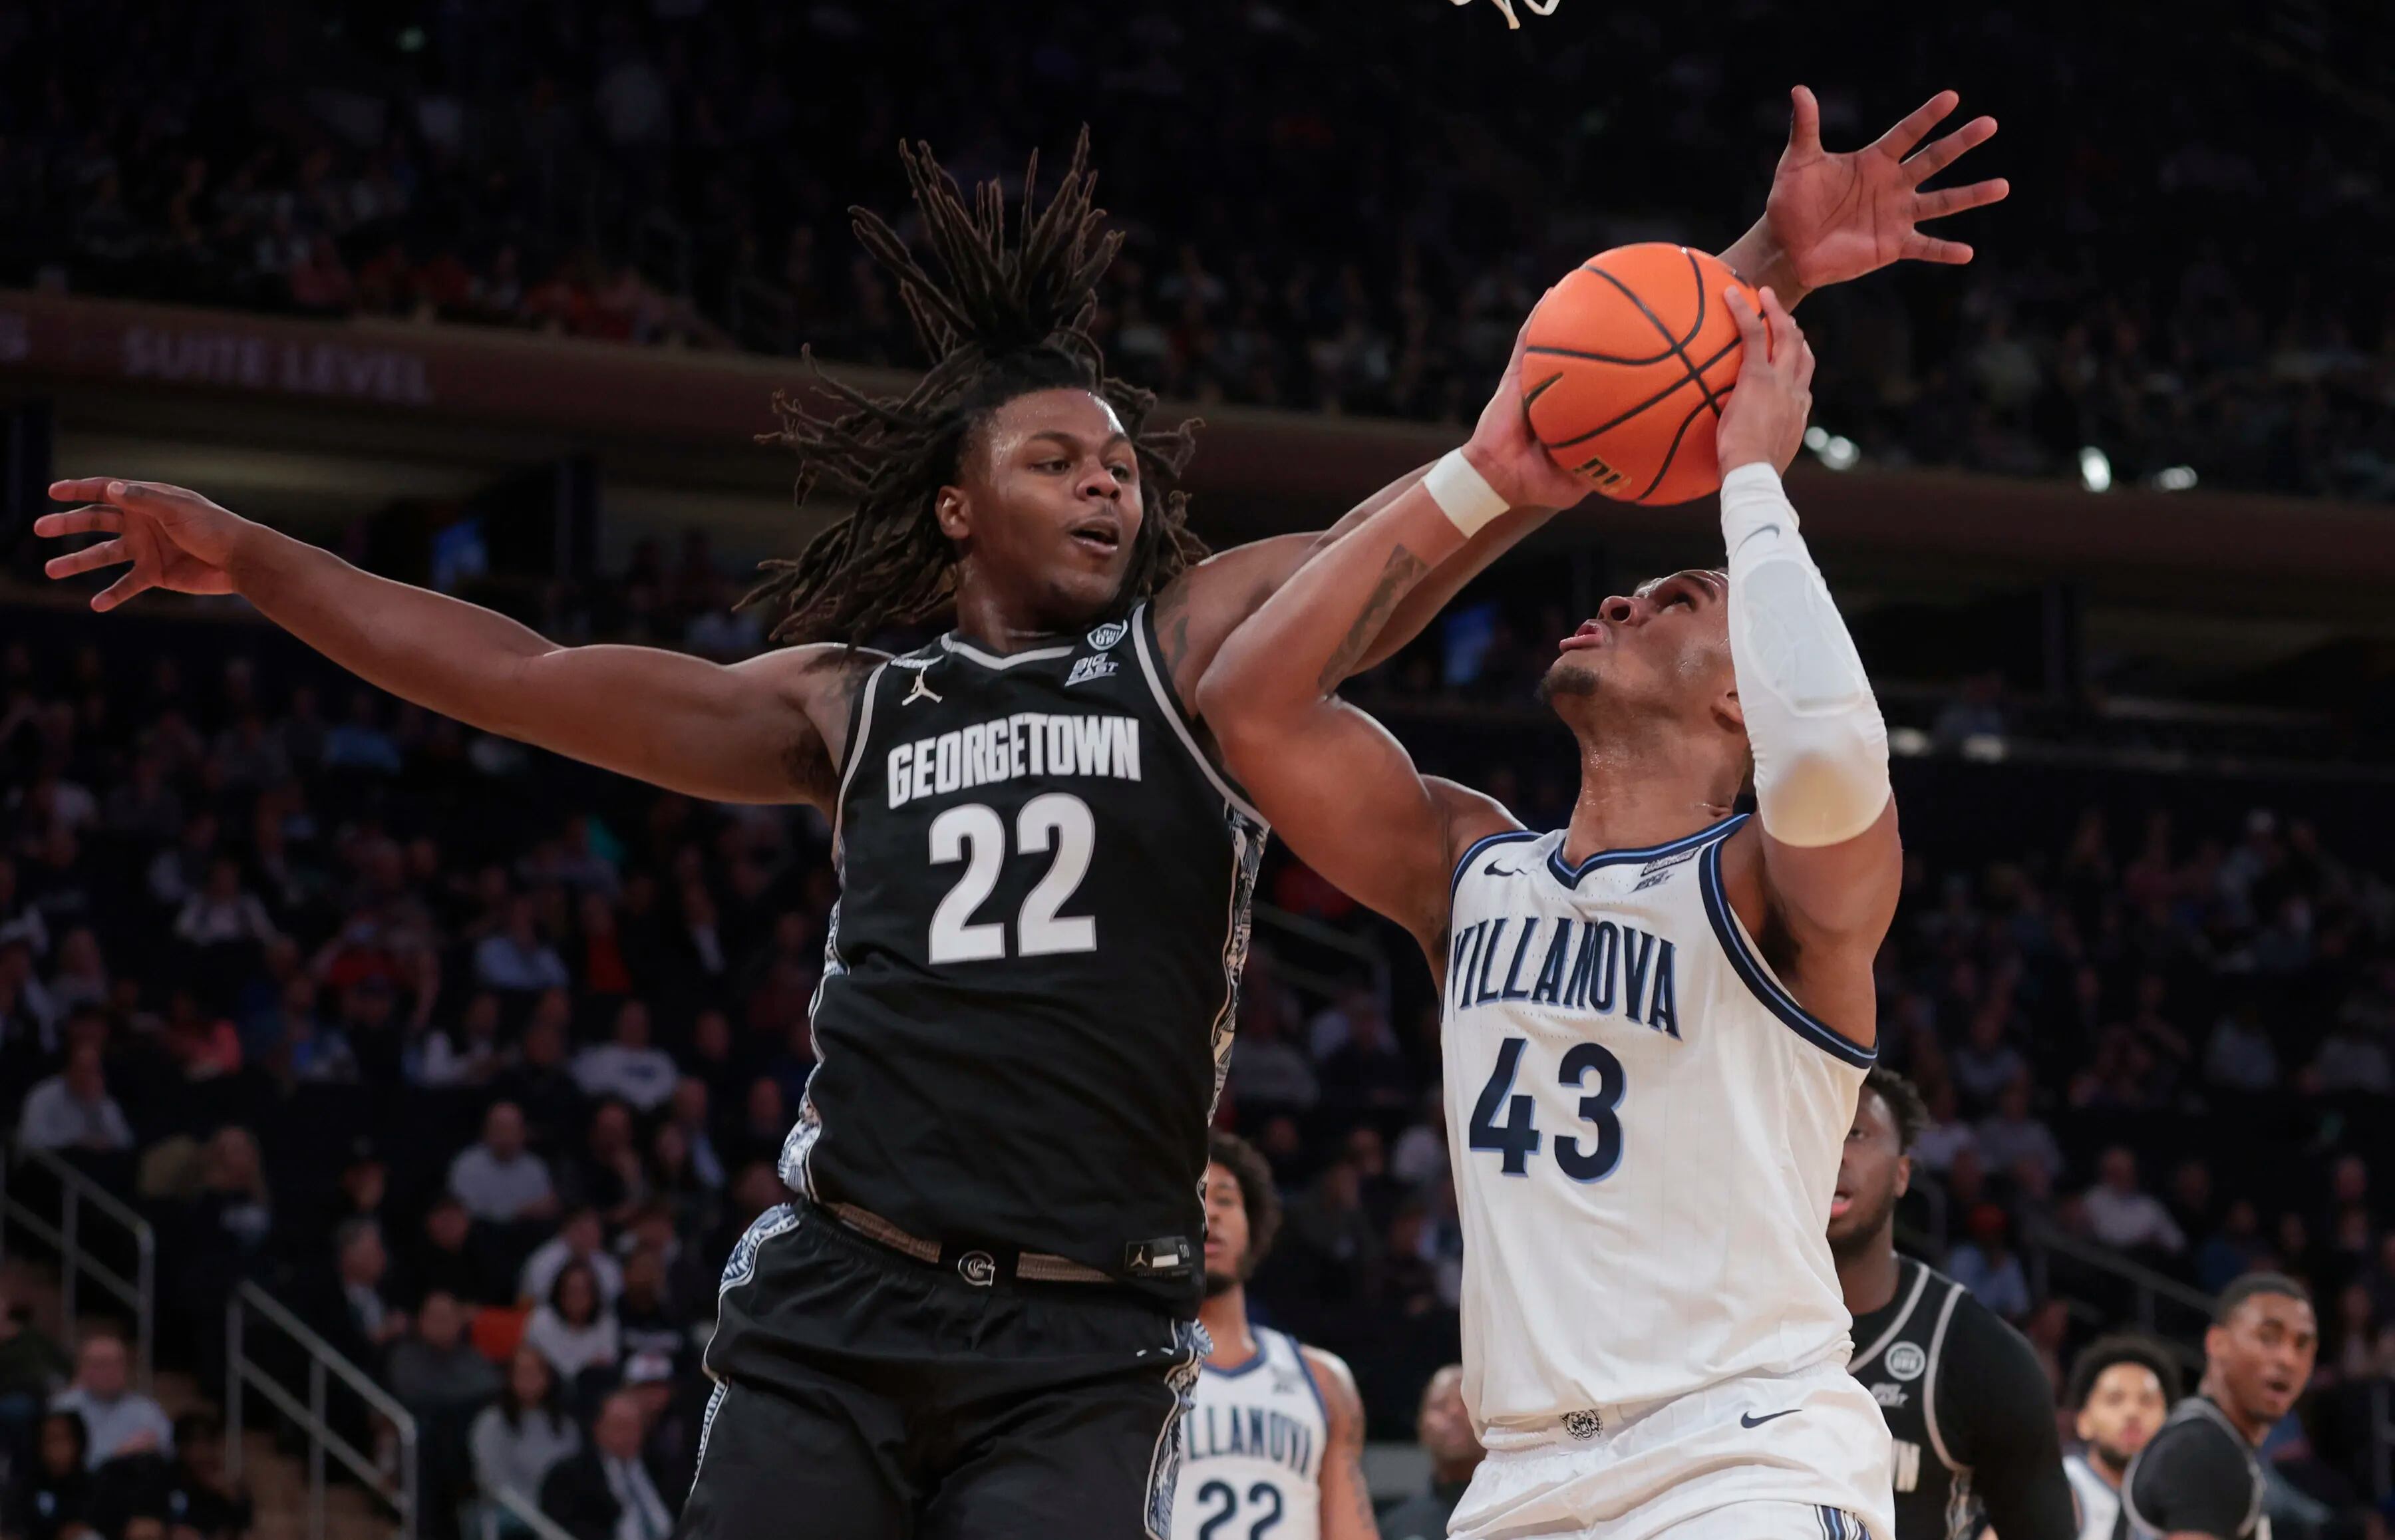 The best players in Georgetown men's basketball history